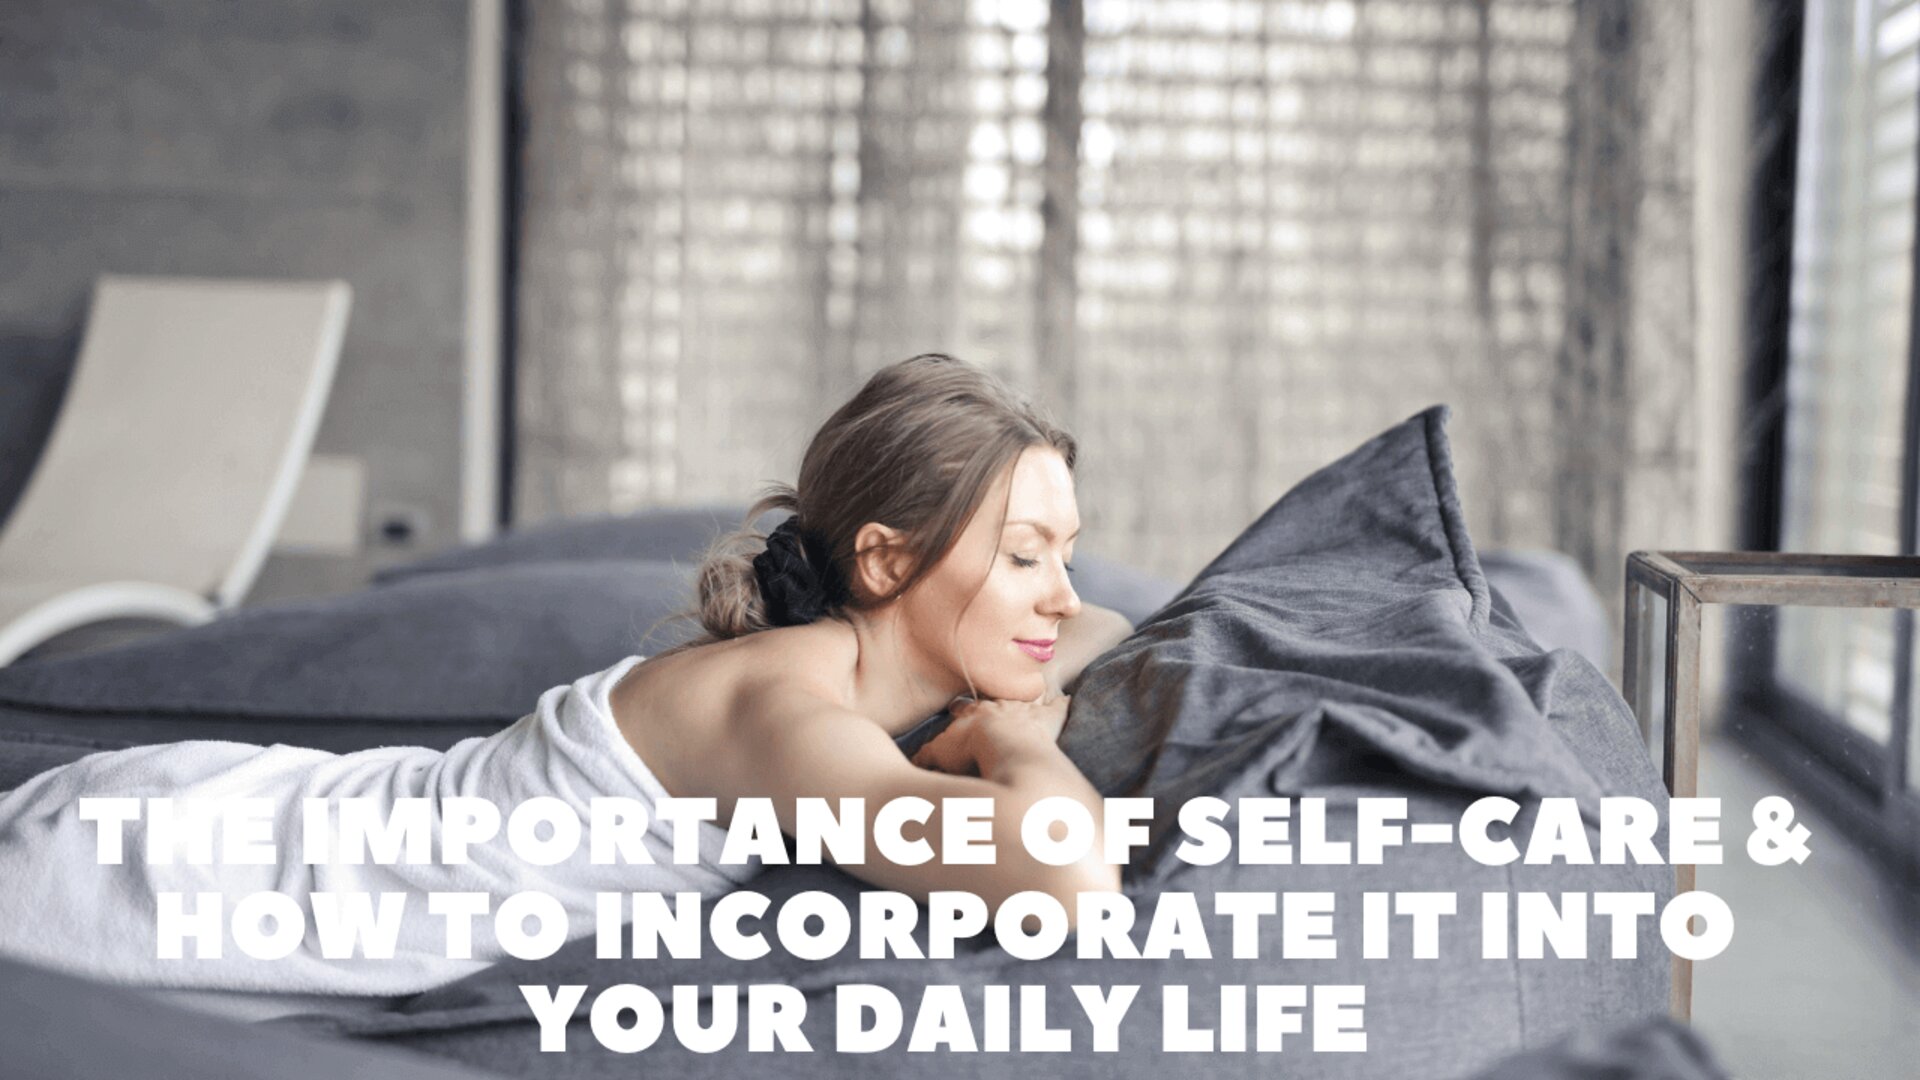 The Importance of Self-Care & How to Incorporate it into Your Daily Life